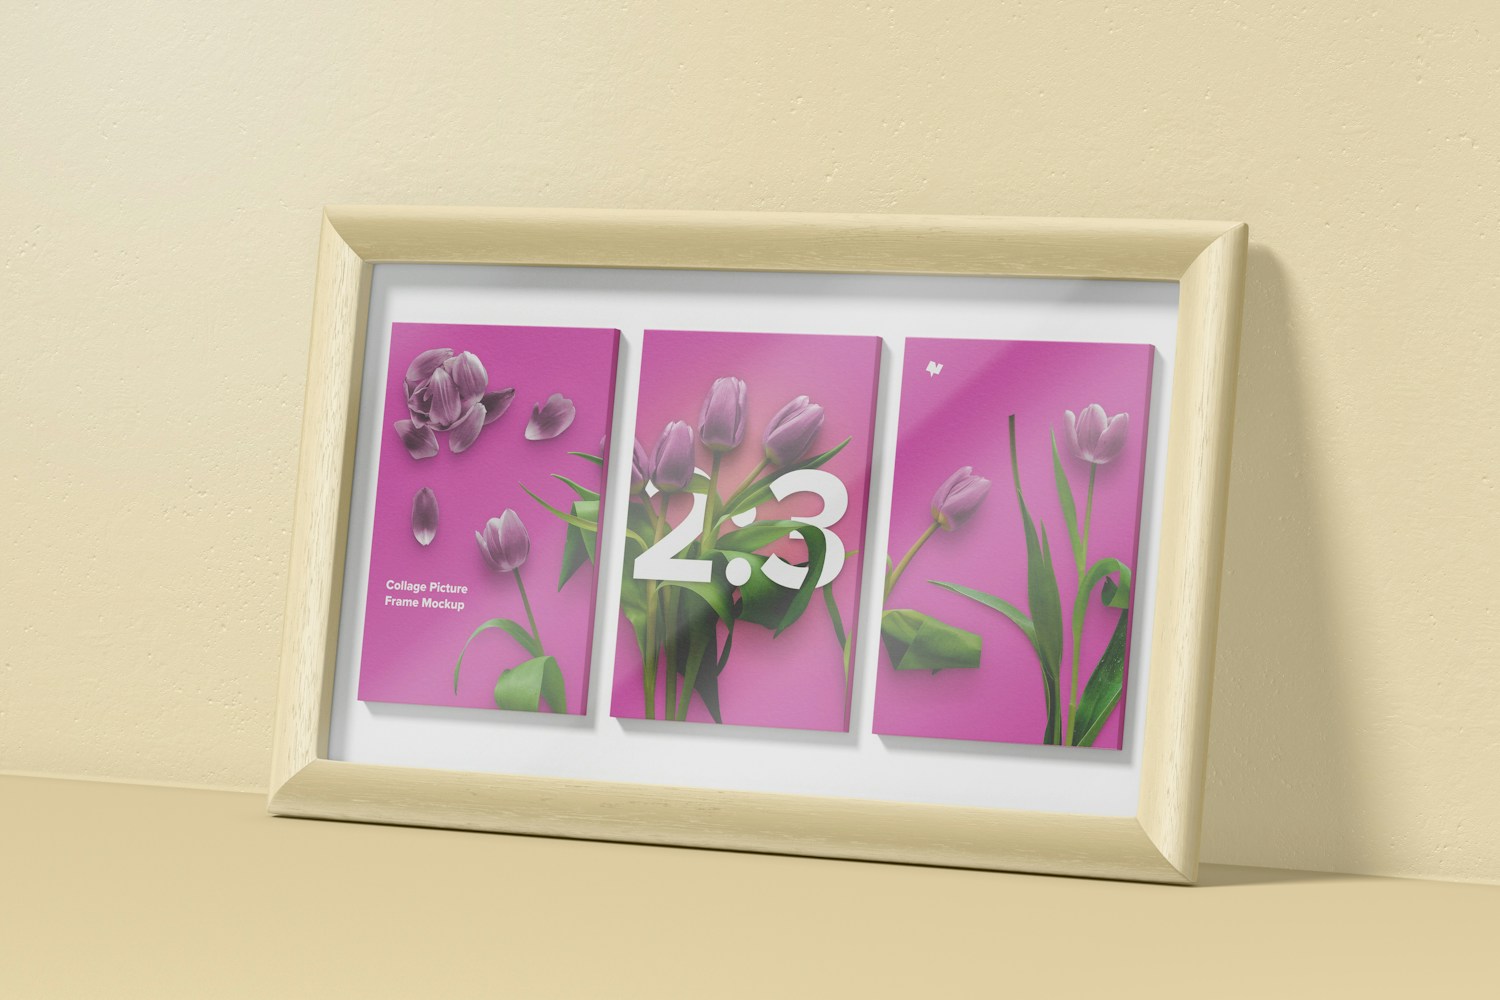 2:3 Collage Picture Frame Mockup, Leaned